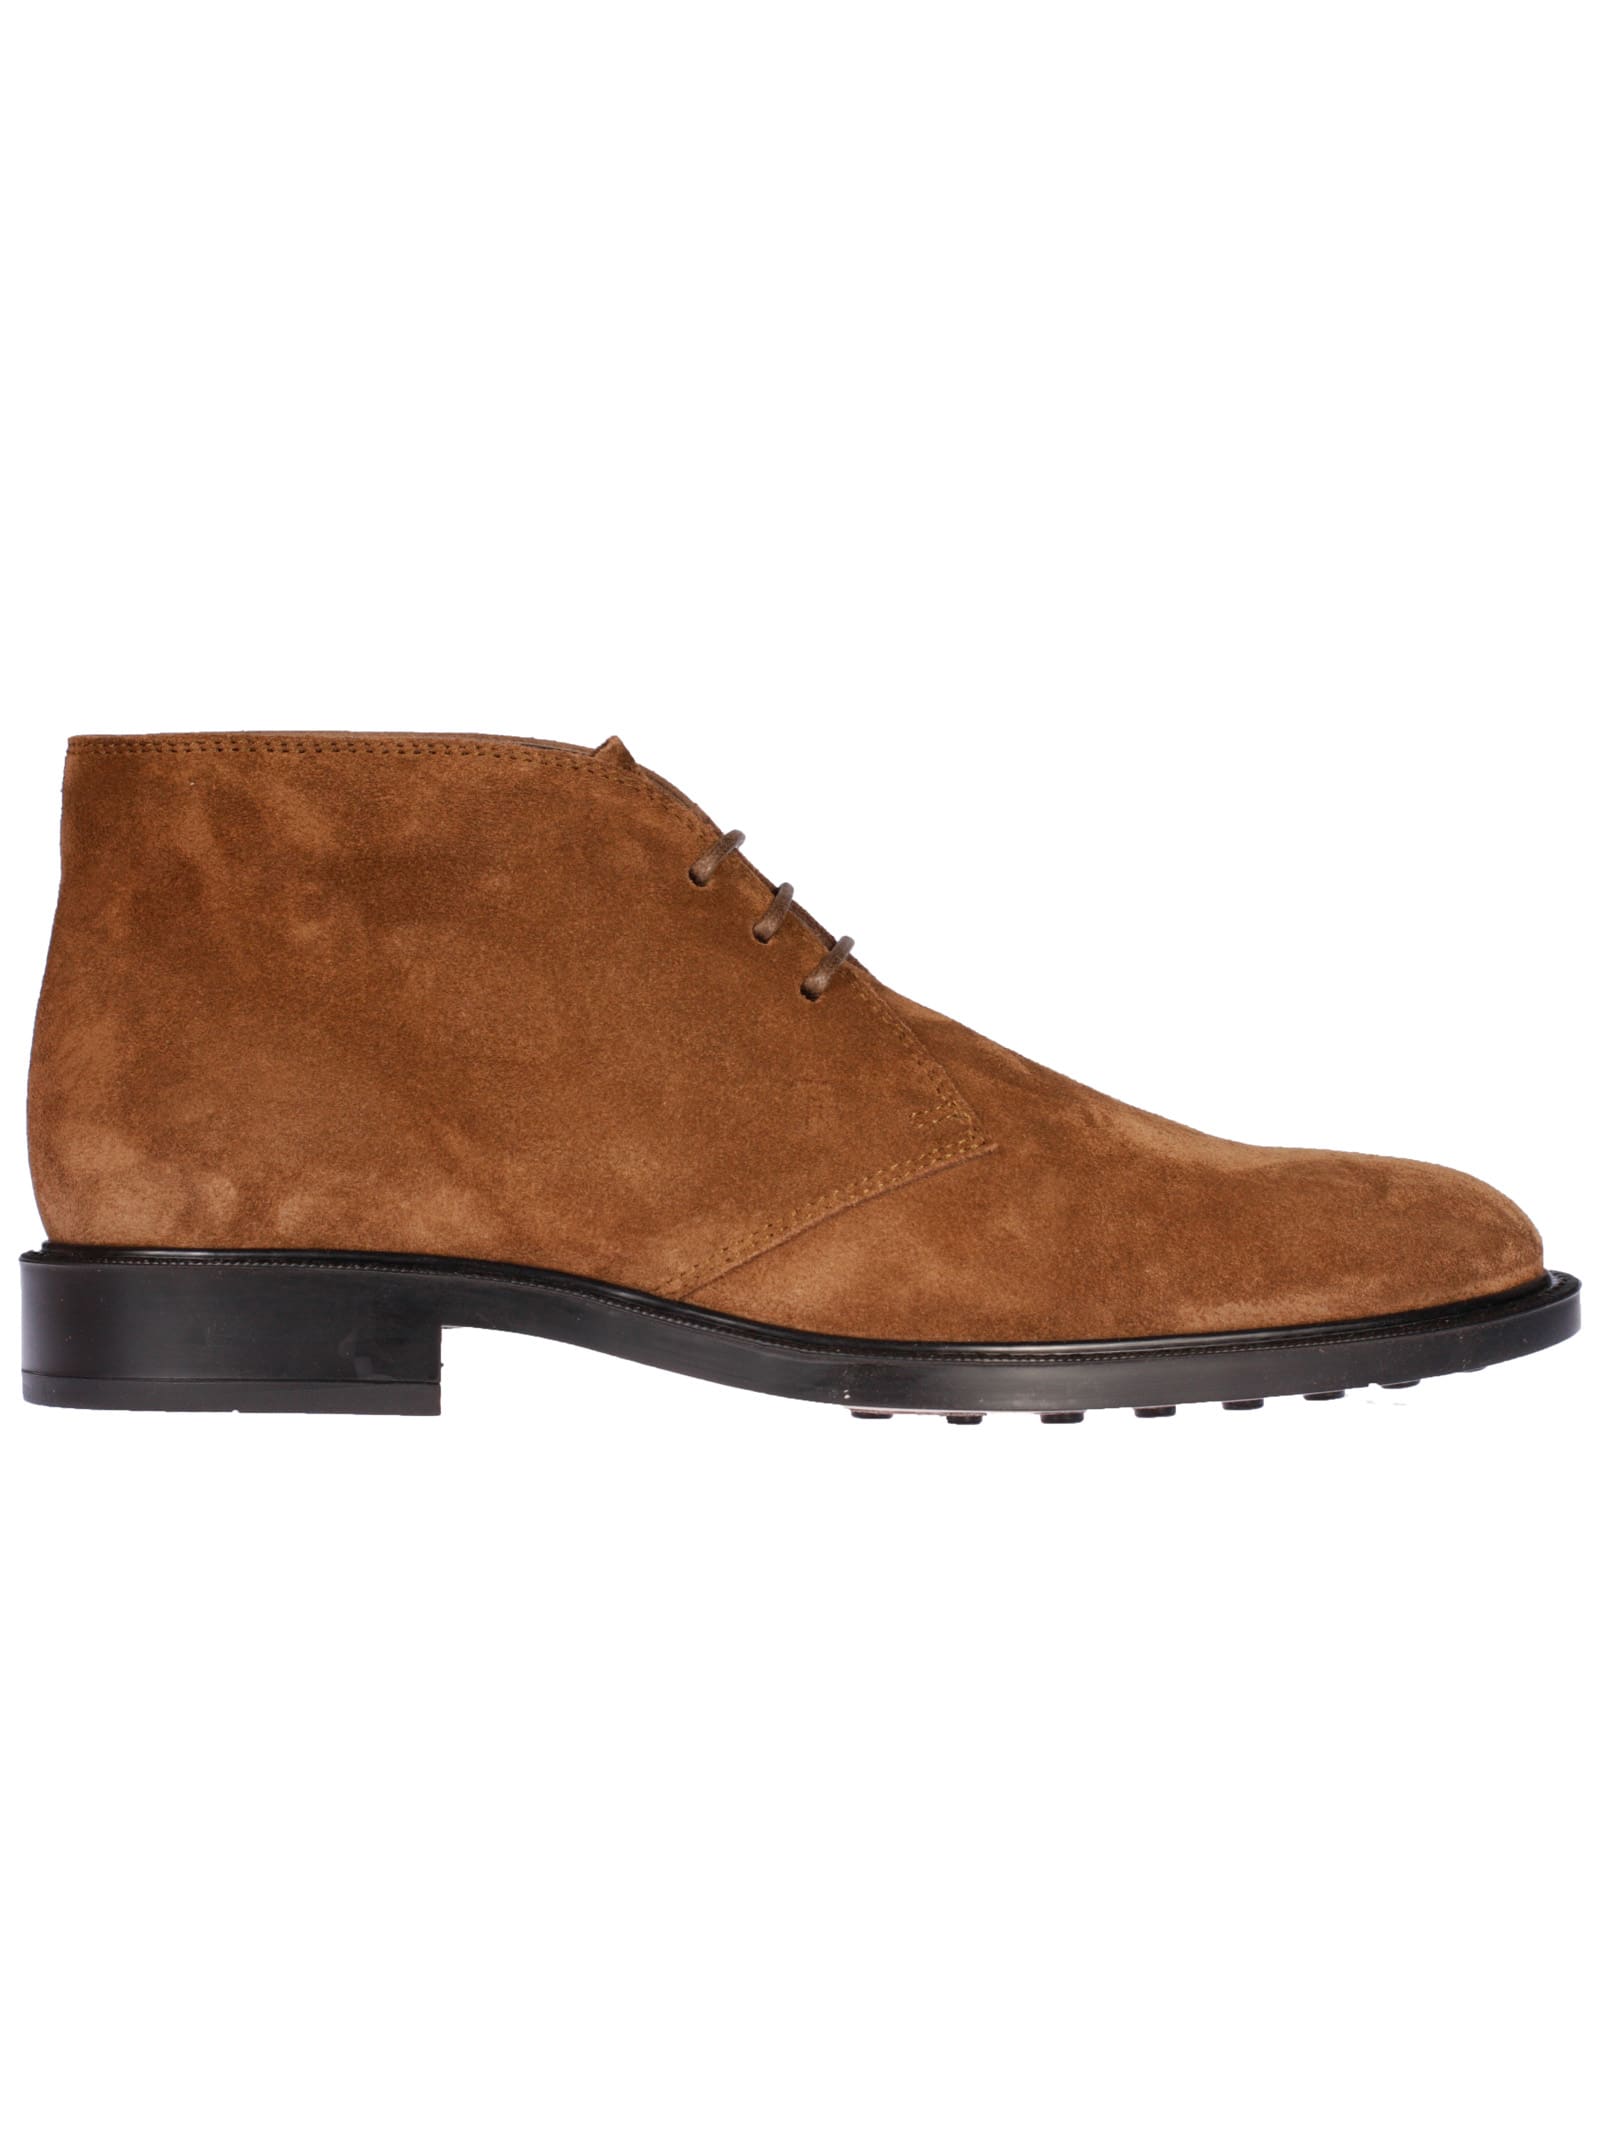 Tods Round Toe Ankle Boots